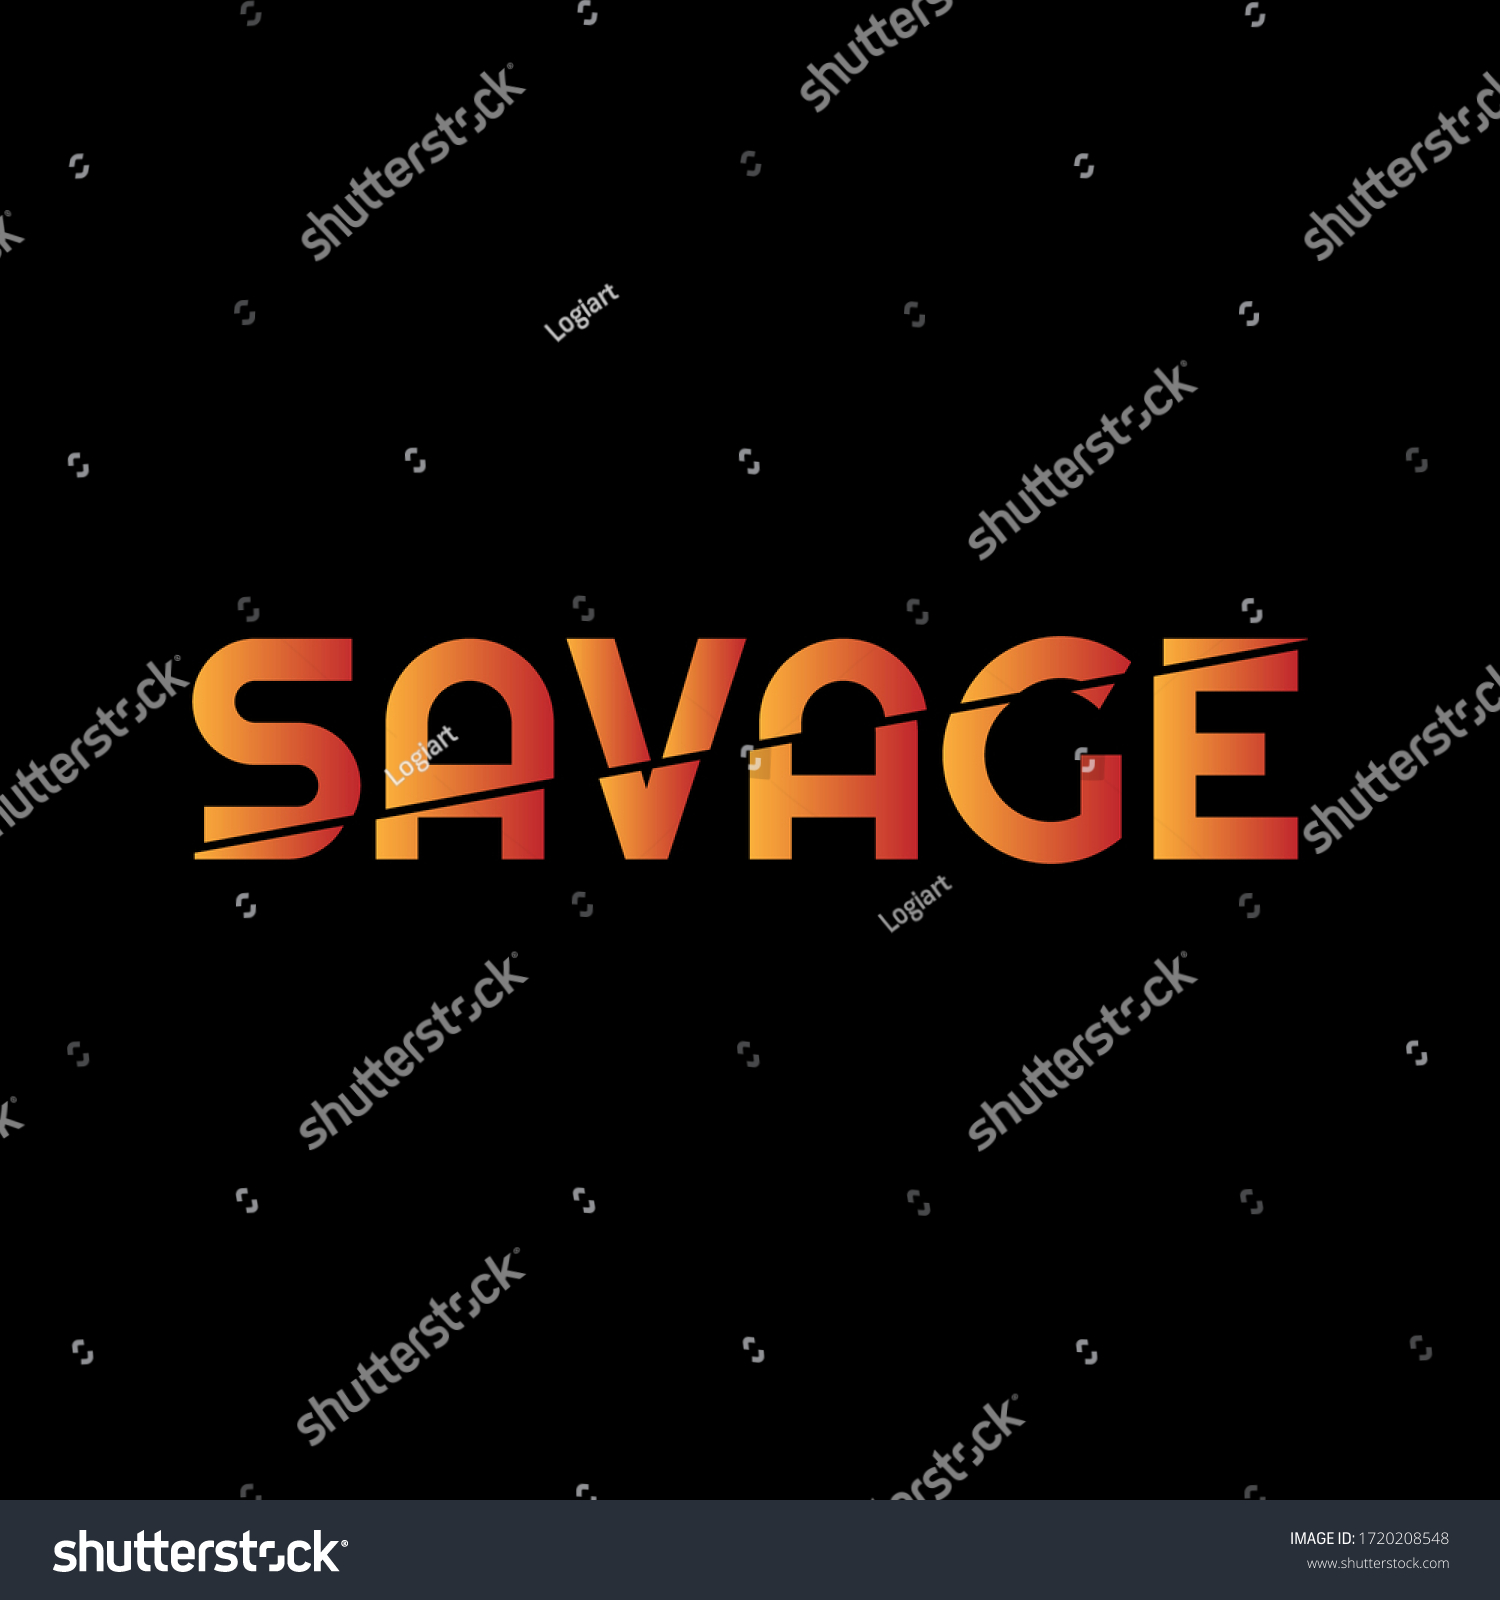 Savage Calligraphy Gradient Color Cut Effect Stock Vector (Royalty Free ...